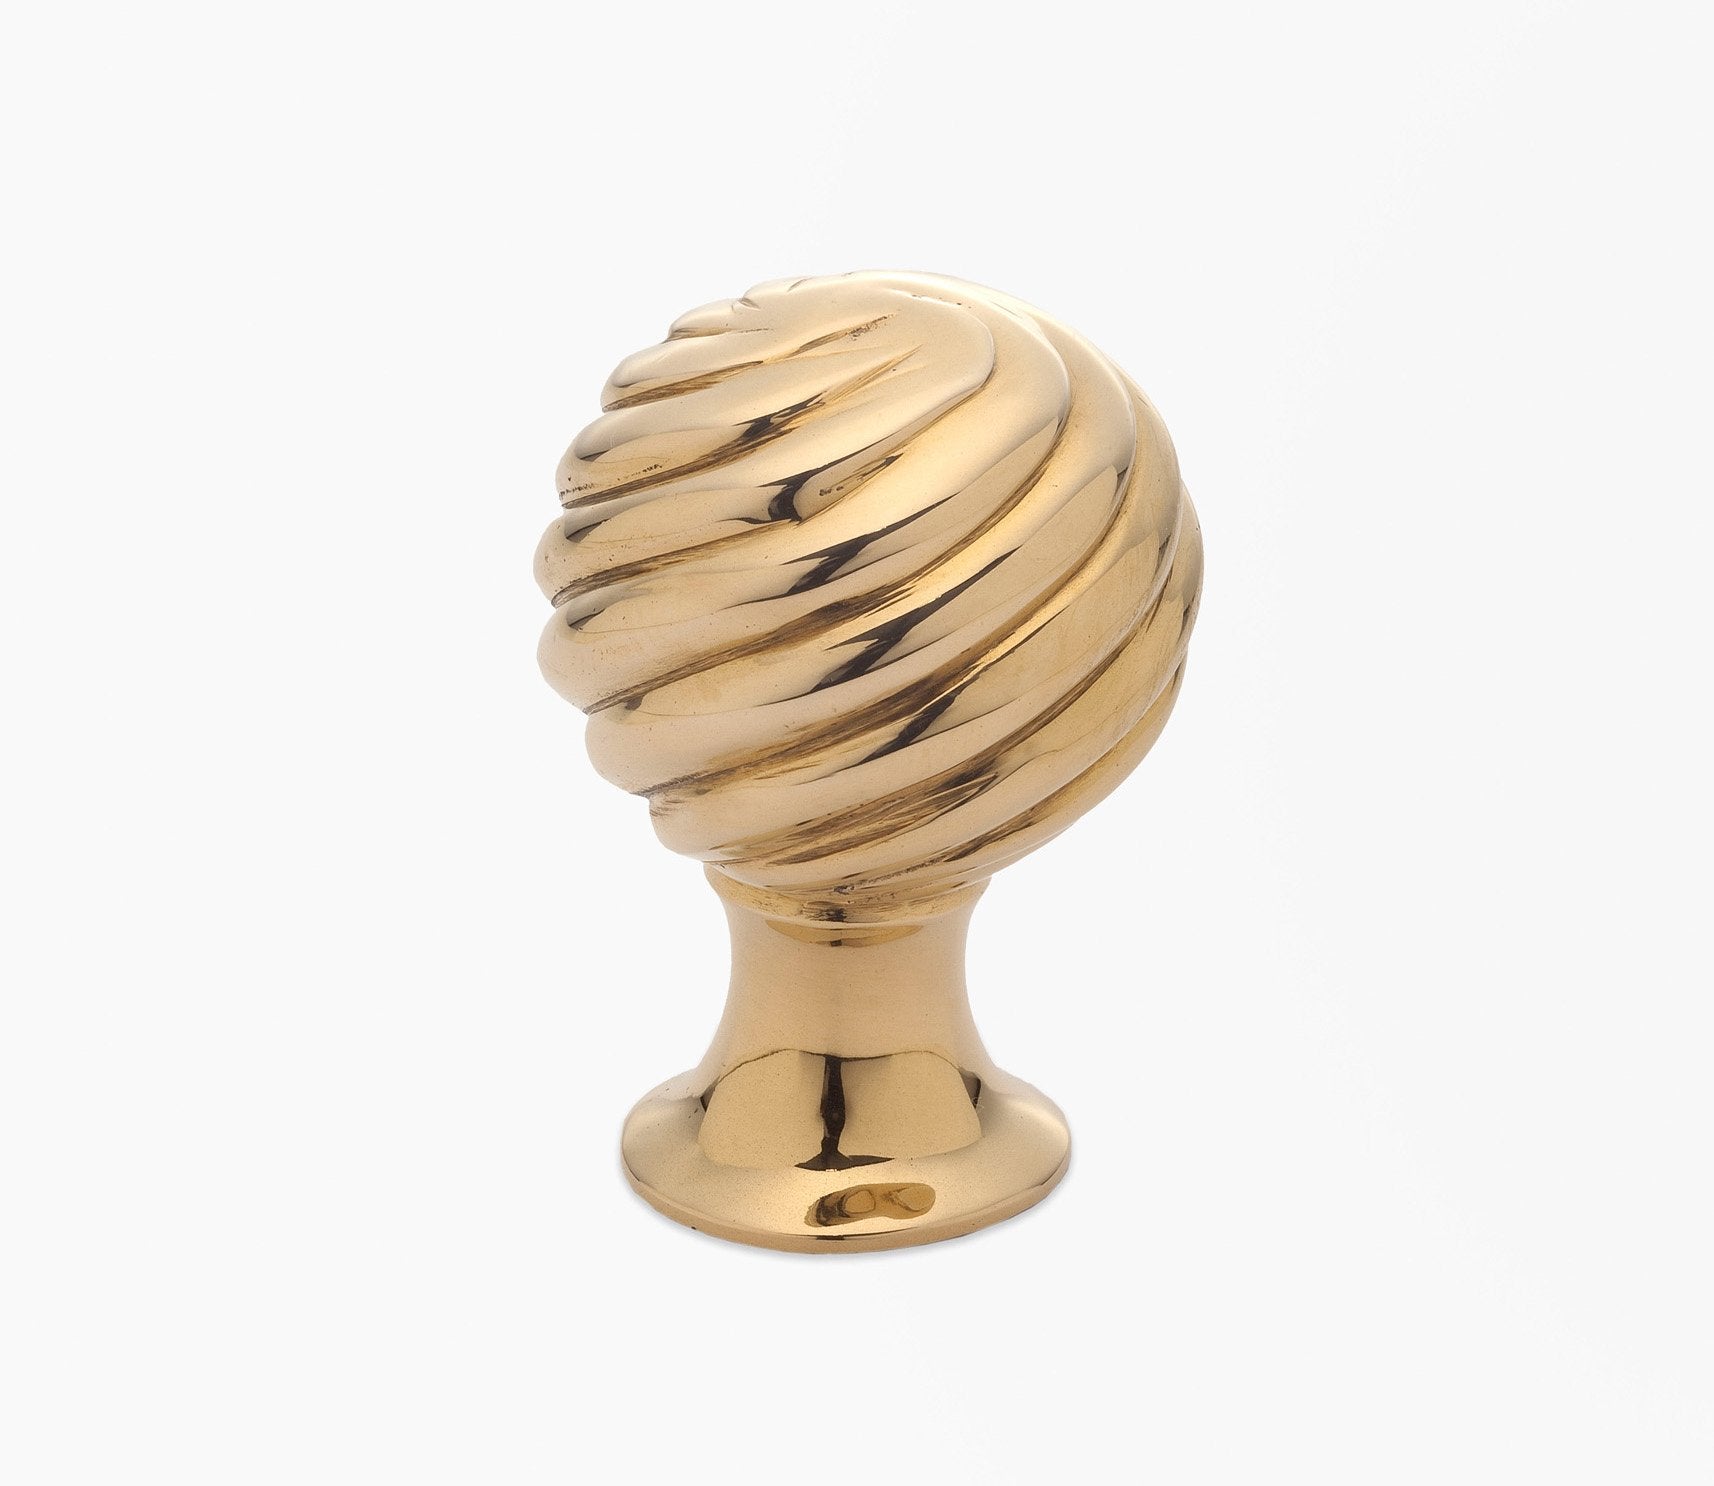 Finial 017 Product Image 1